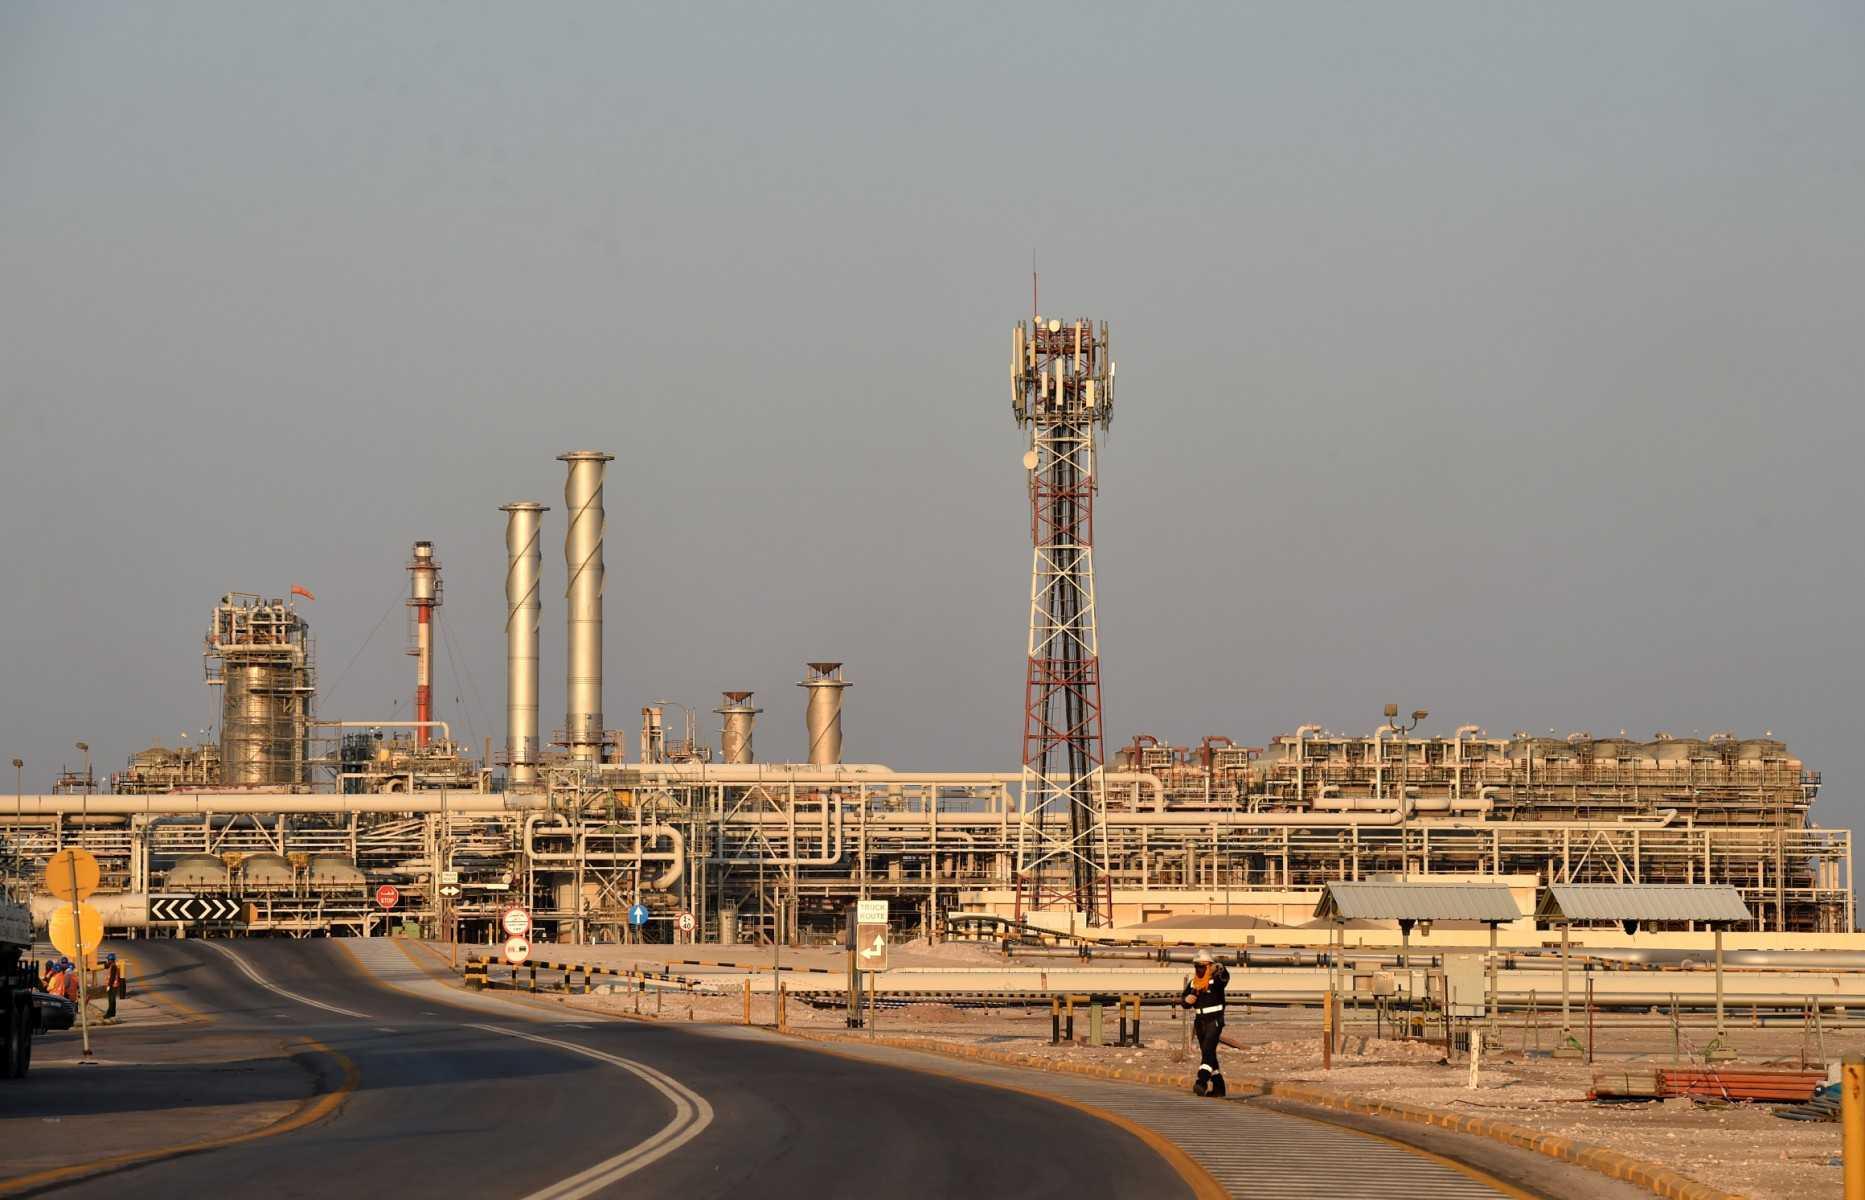 This file photo shows a general view of Saudi Aramco's Abqaiq oil processing plant on Sept 20, 2019. Photo: AFP